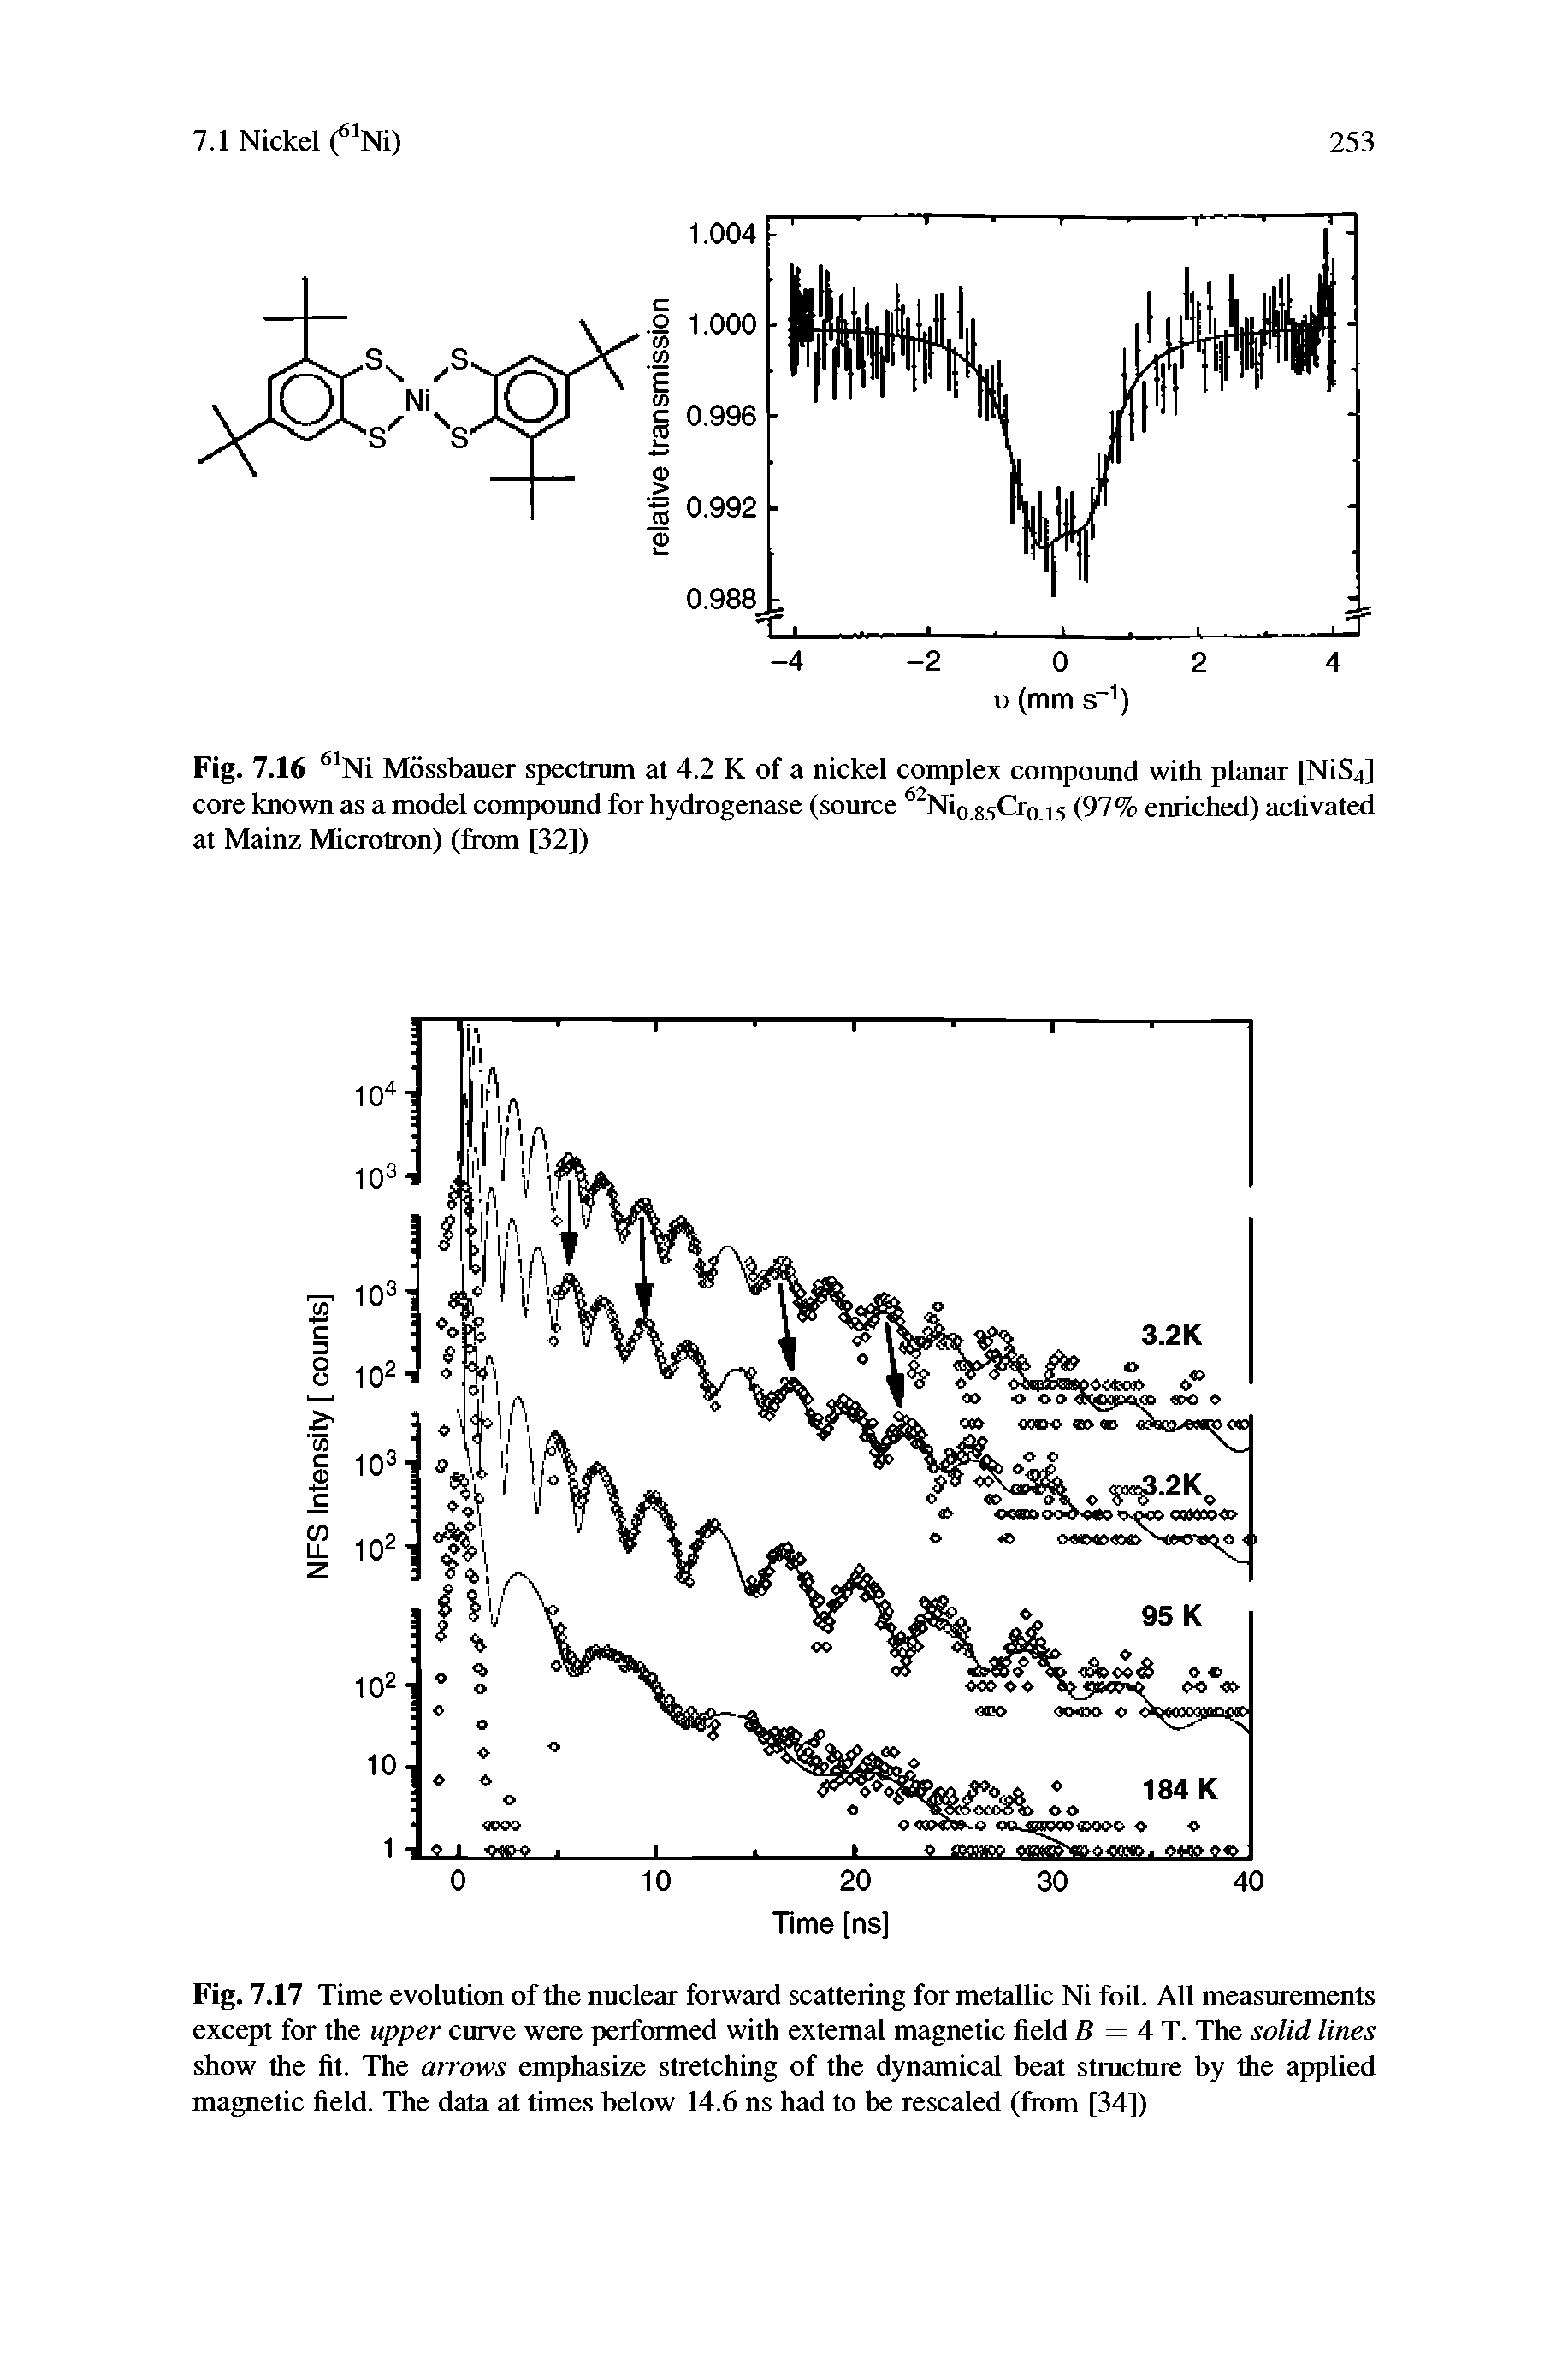 Fig. 7.17 Time evolution of the nuclear forward scattering for metallic Ni foil. All measurements except for the upper curve were performed with external magnetic field B = 4 T. The solid lines show the fit. The arrows emphasize stretching of the dynamical beat structure by the applied magnetic field. The data at times below 14.6 ns had to be rescaled (from [34])...